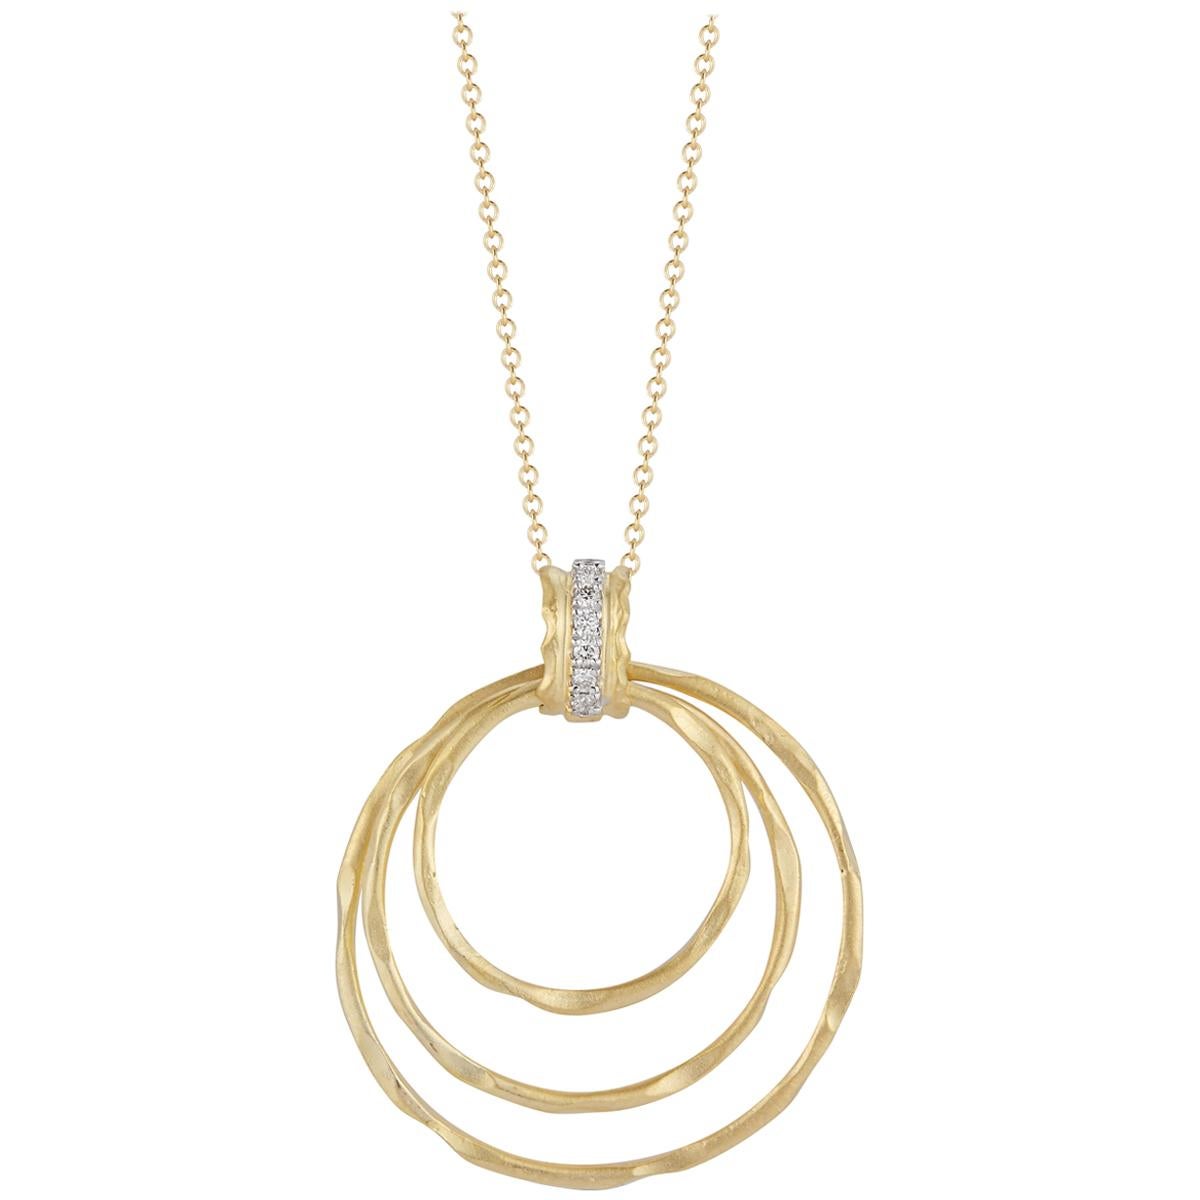 Handcrafted 14 Karat Yellow Gold Cascading Circles Pendant For Sale